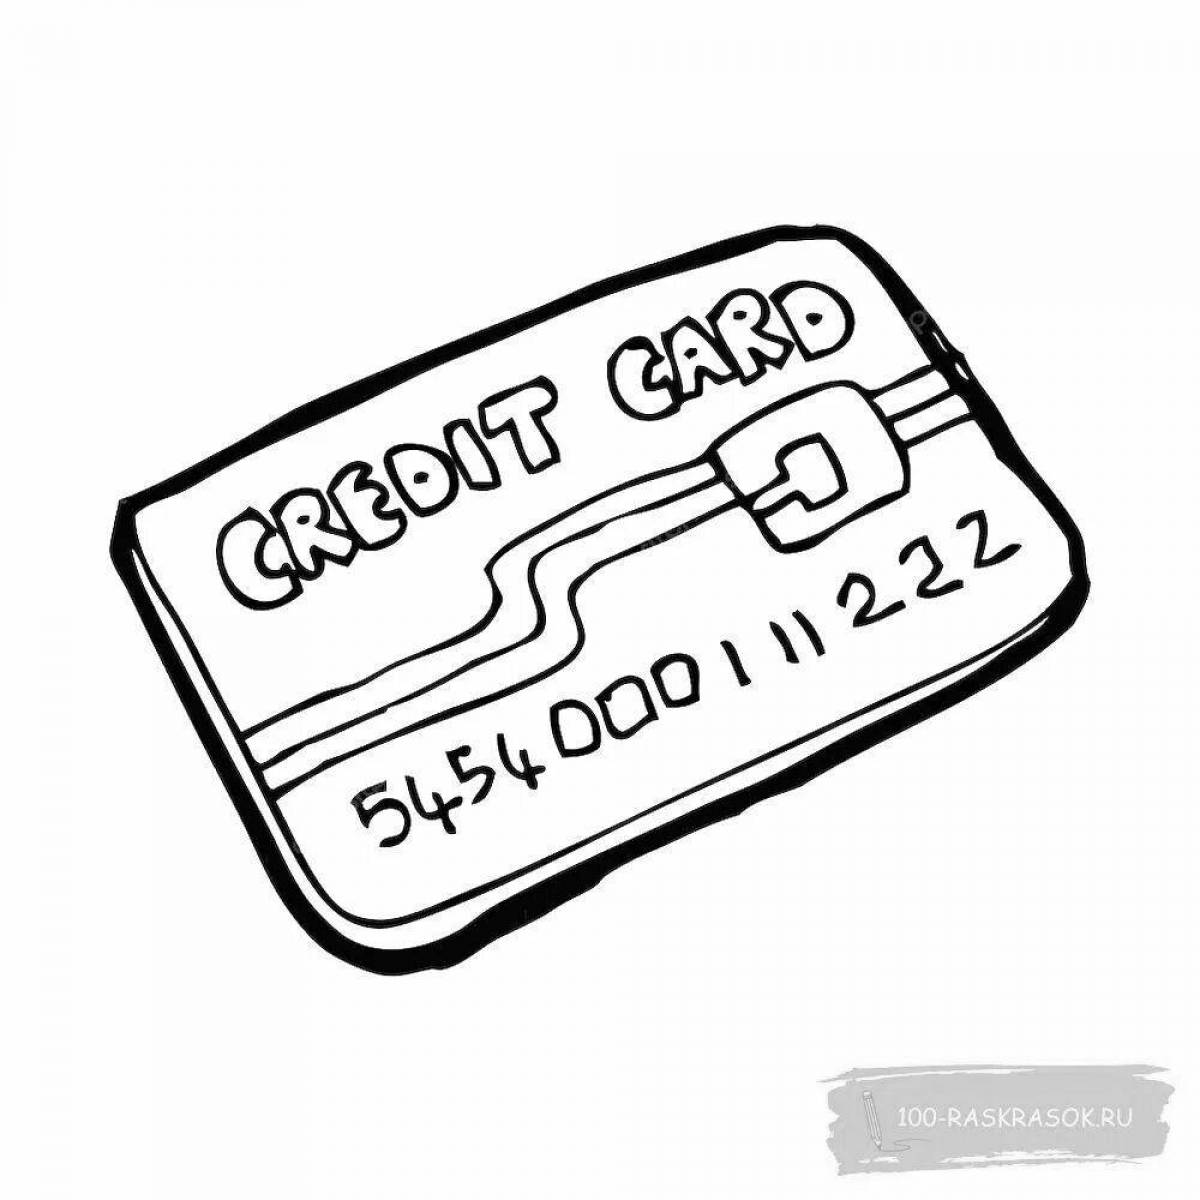 Adorable bank card coloring page